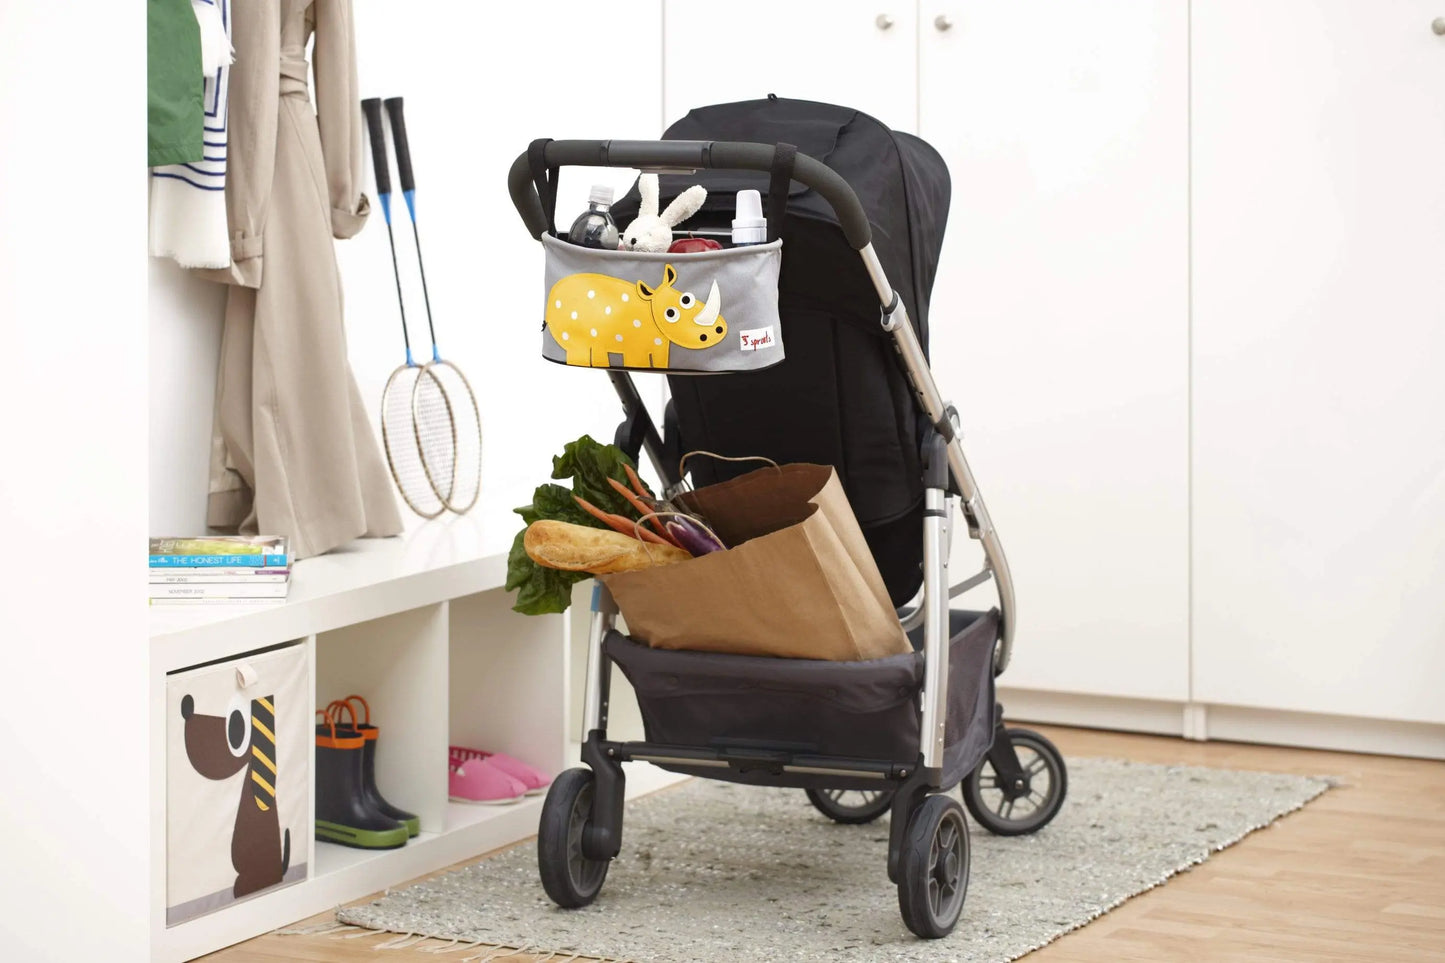 3 Sprouts Baby Stroller Organiser - Rhino 3 Sprouts 34.95